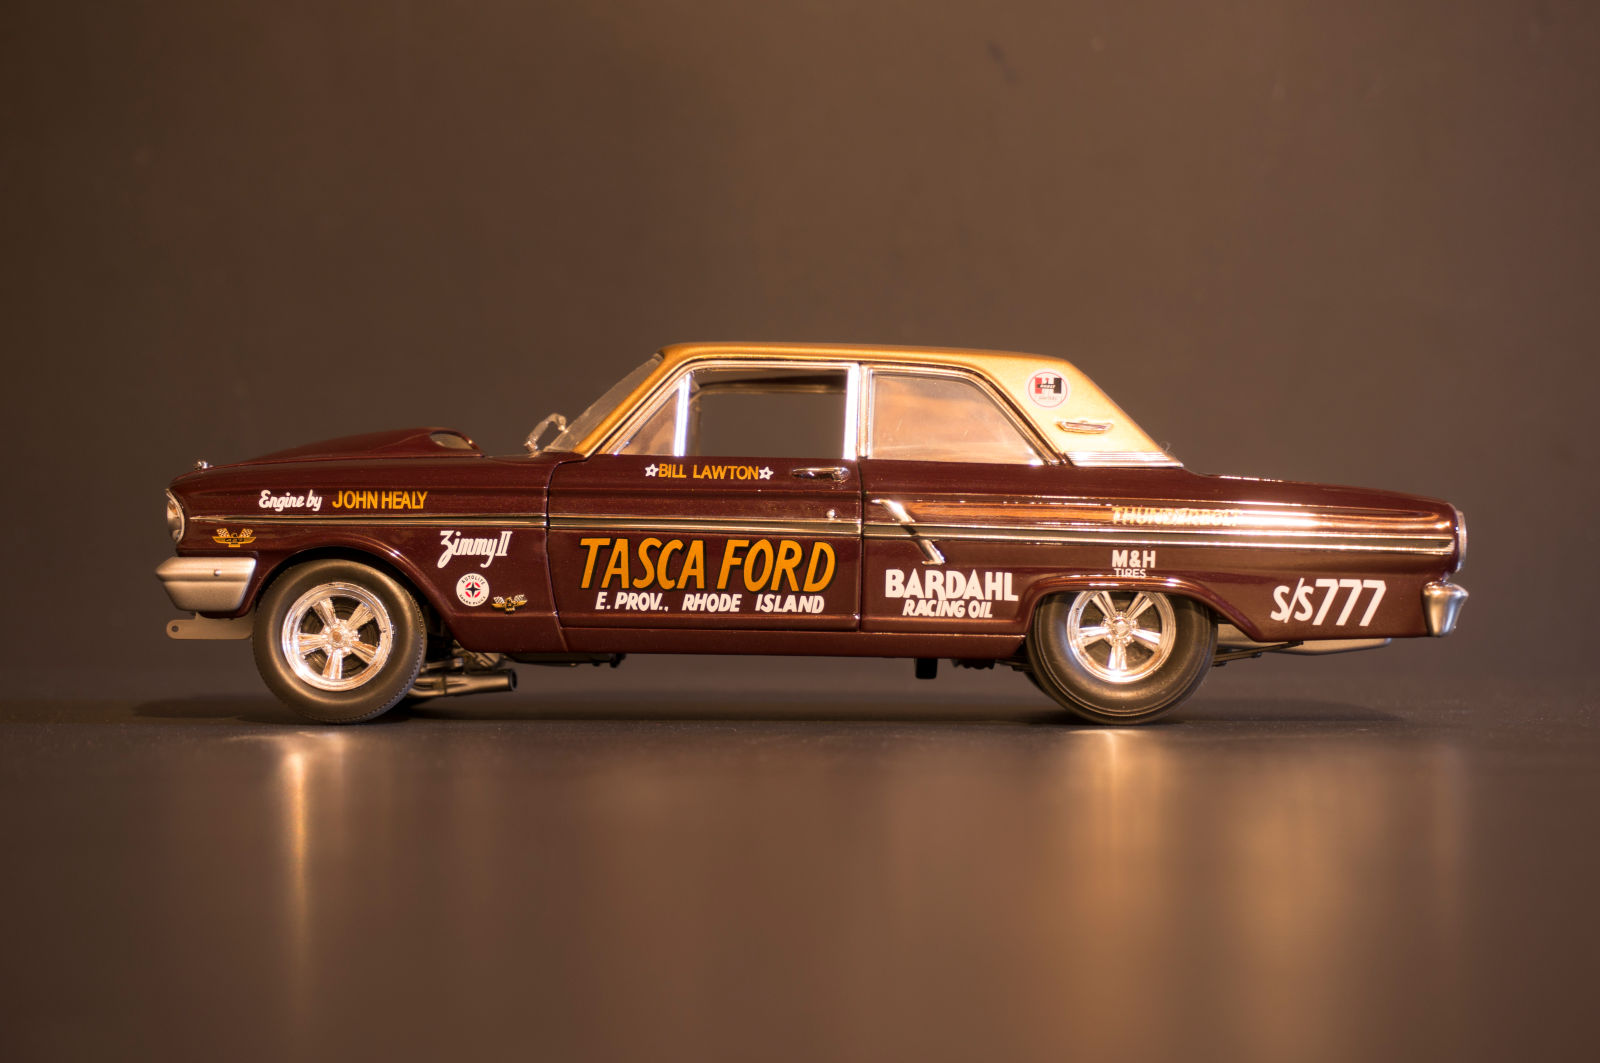 Illustration for article titled Week of 1:18 #2: Ford Fairlane Thunderbolt